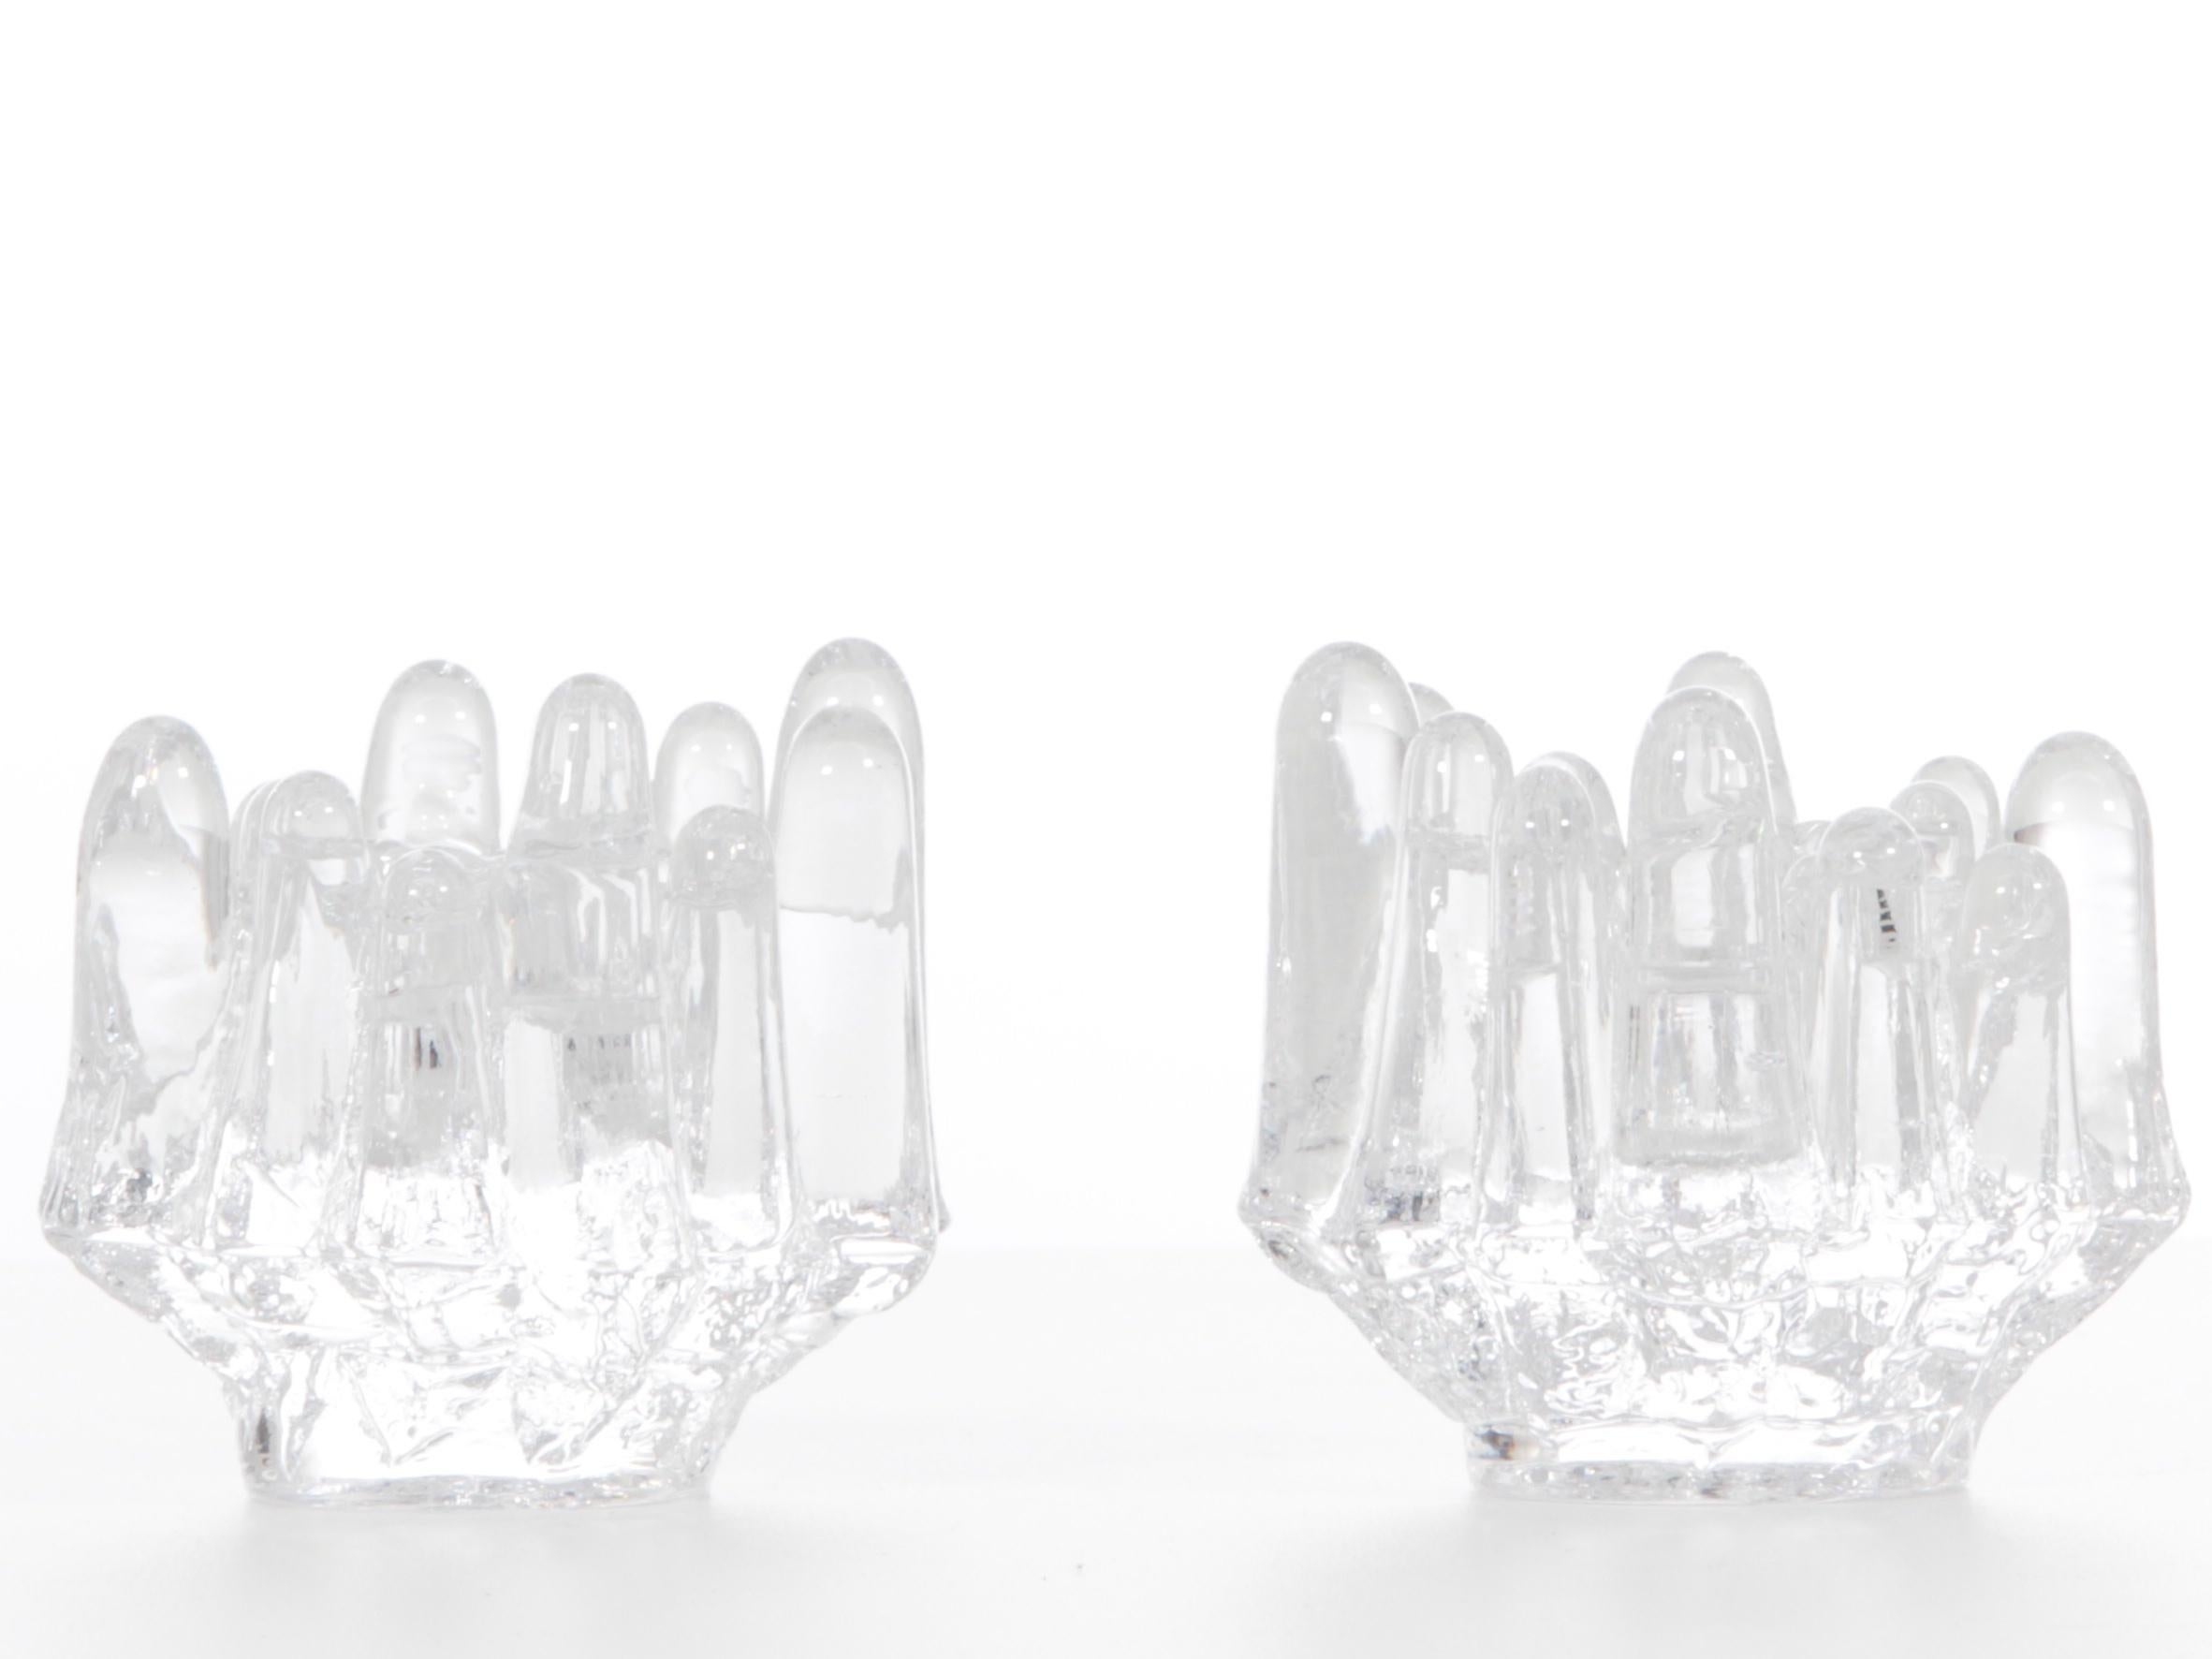 Pair of crystal polar candlesticks by Goran Warff for Costa Boda.

Polar candleholders are a Swedish Classic.
When Goran Warff created the Polar collection in the late sixties at Kosta Boda, he gave his candlesticks a form of ice block playing on